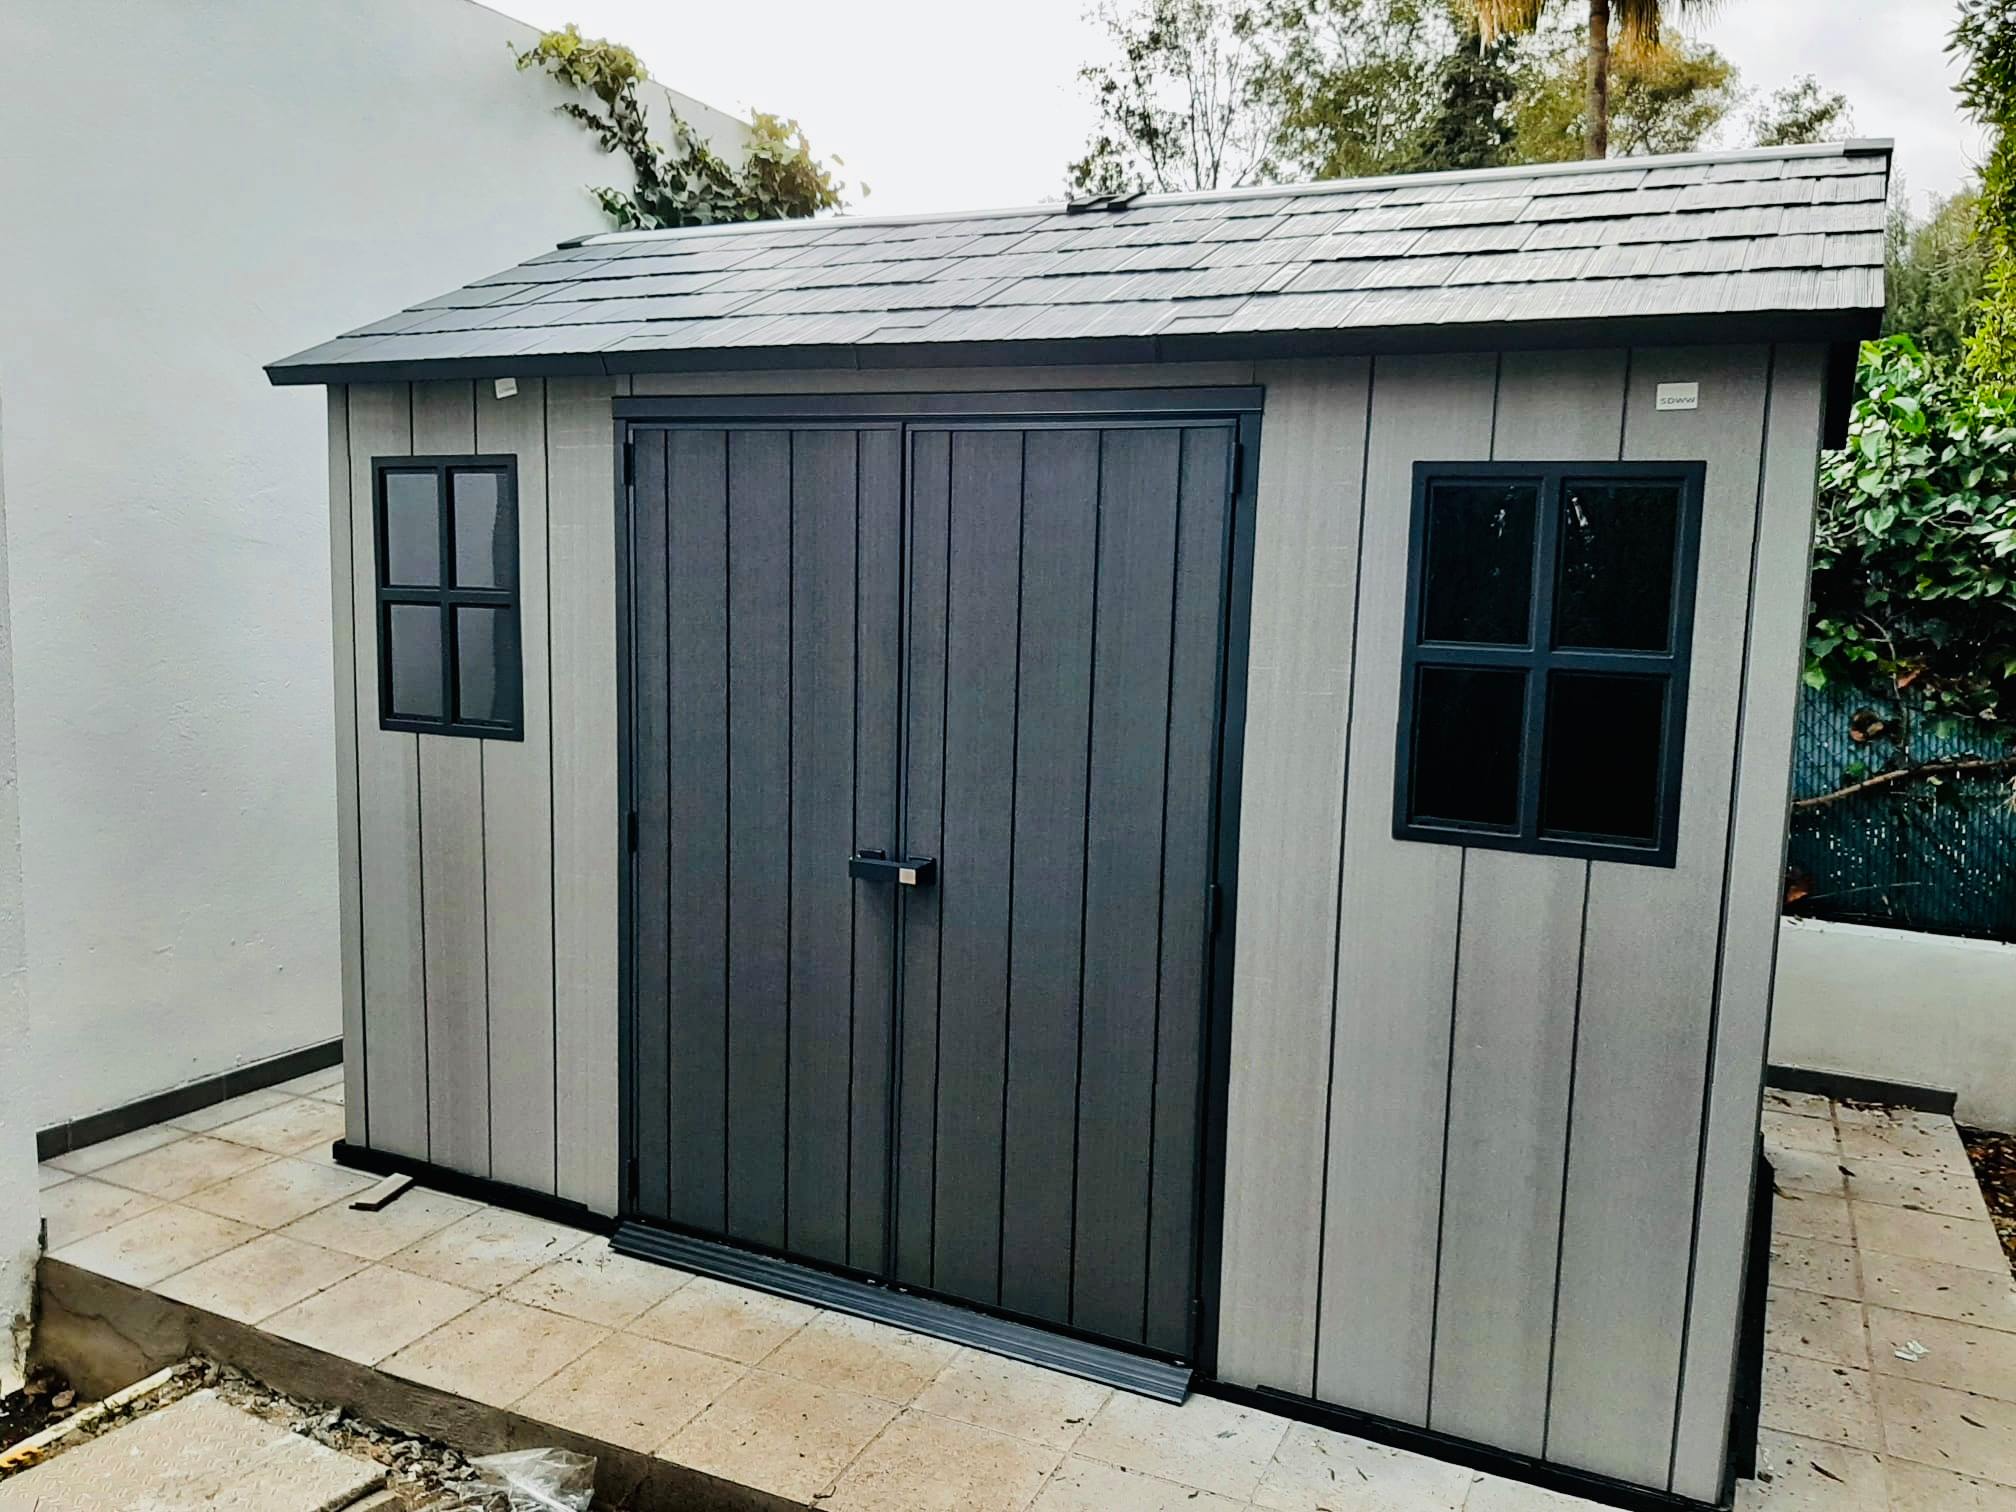 This Keter Oakland shed was delivered and built yesterday for a lovely family in Calahonda  www.favellshomeandlifestyle.... » Outdoor Furniture Fuengirola, Costa Del Sol, Spain